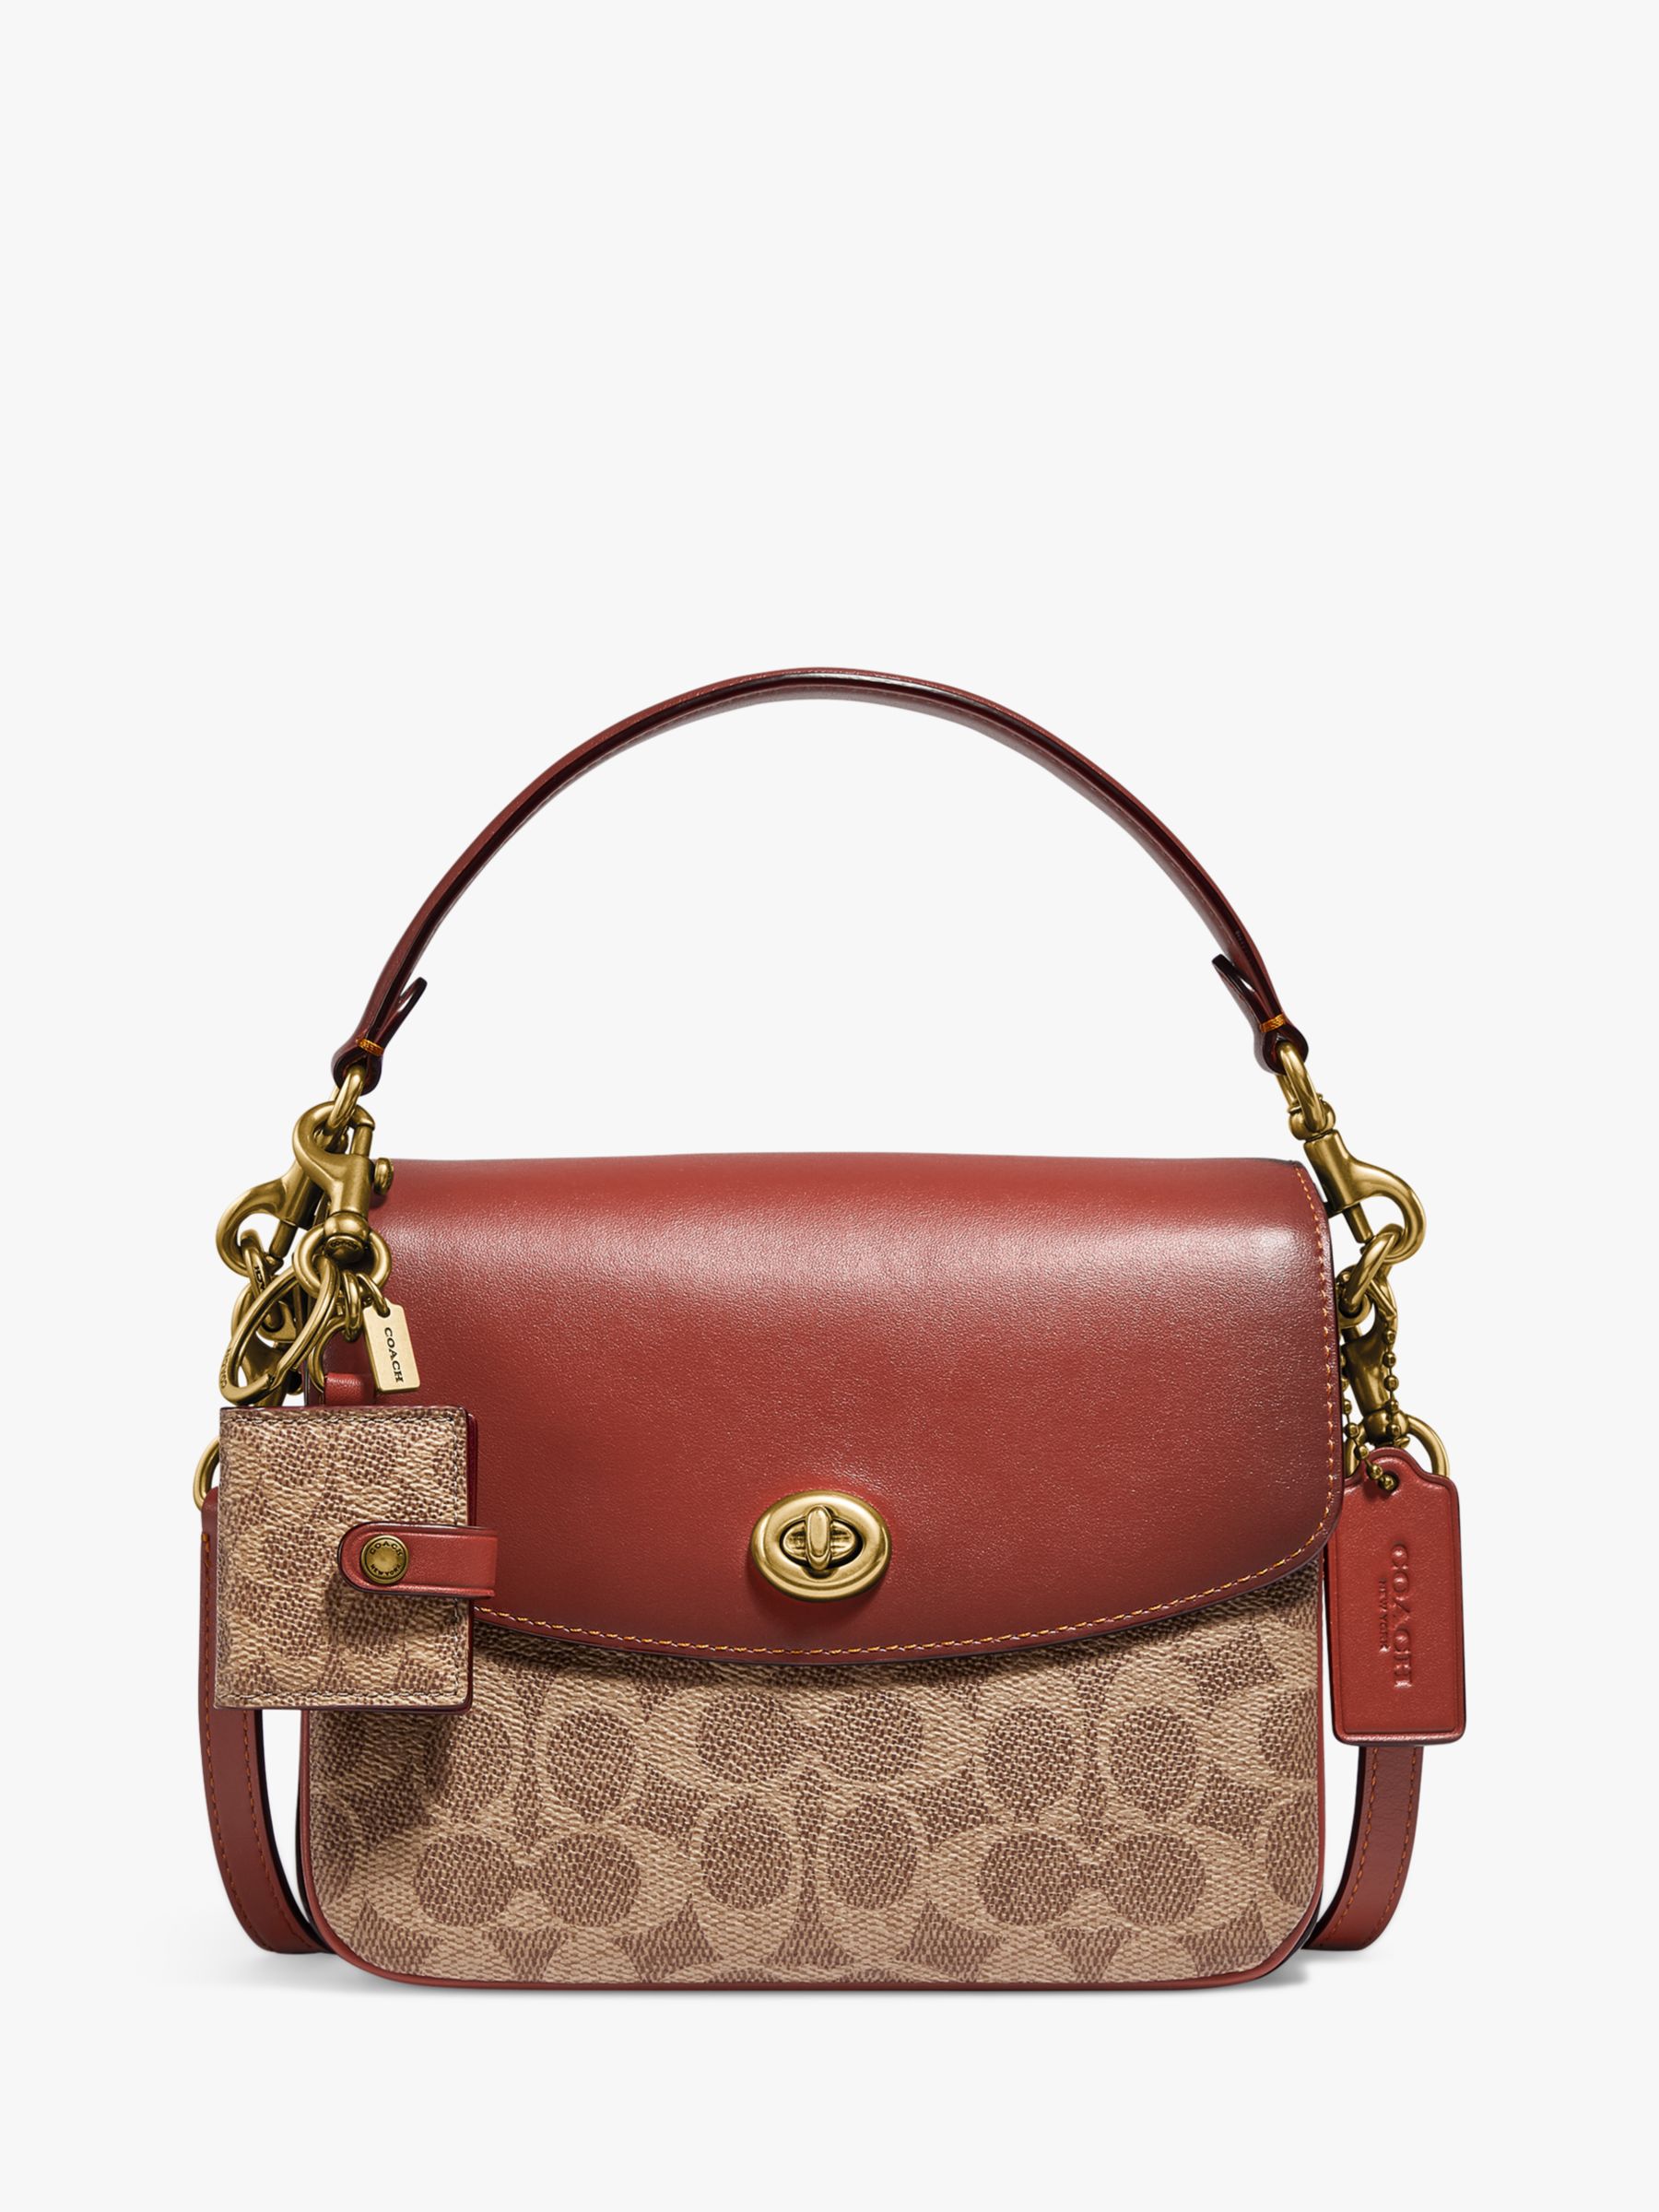 Coach Cassie 19 Leather Cross Body Bag, Tan Rust at John Lewis & Partners